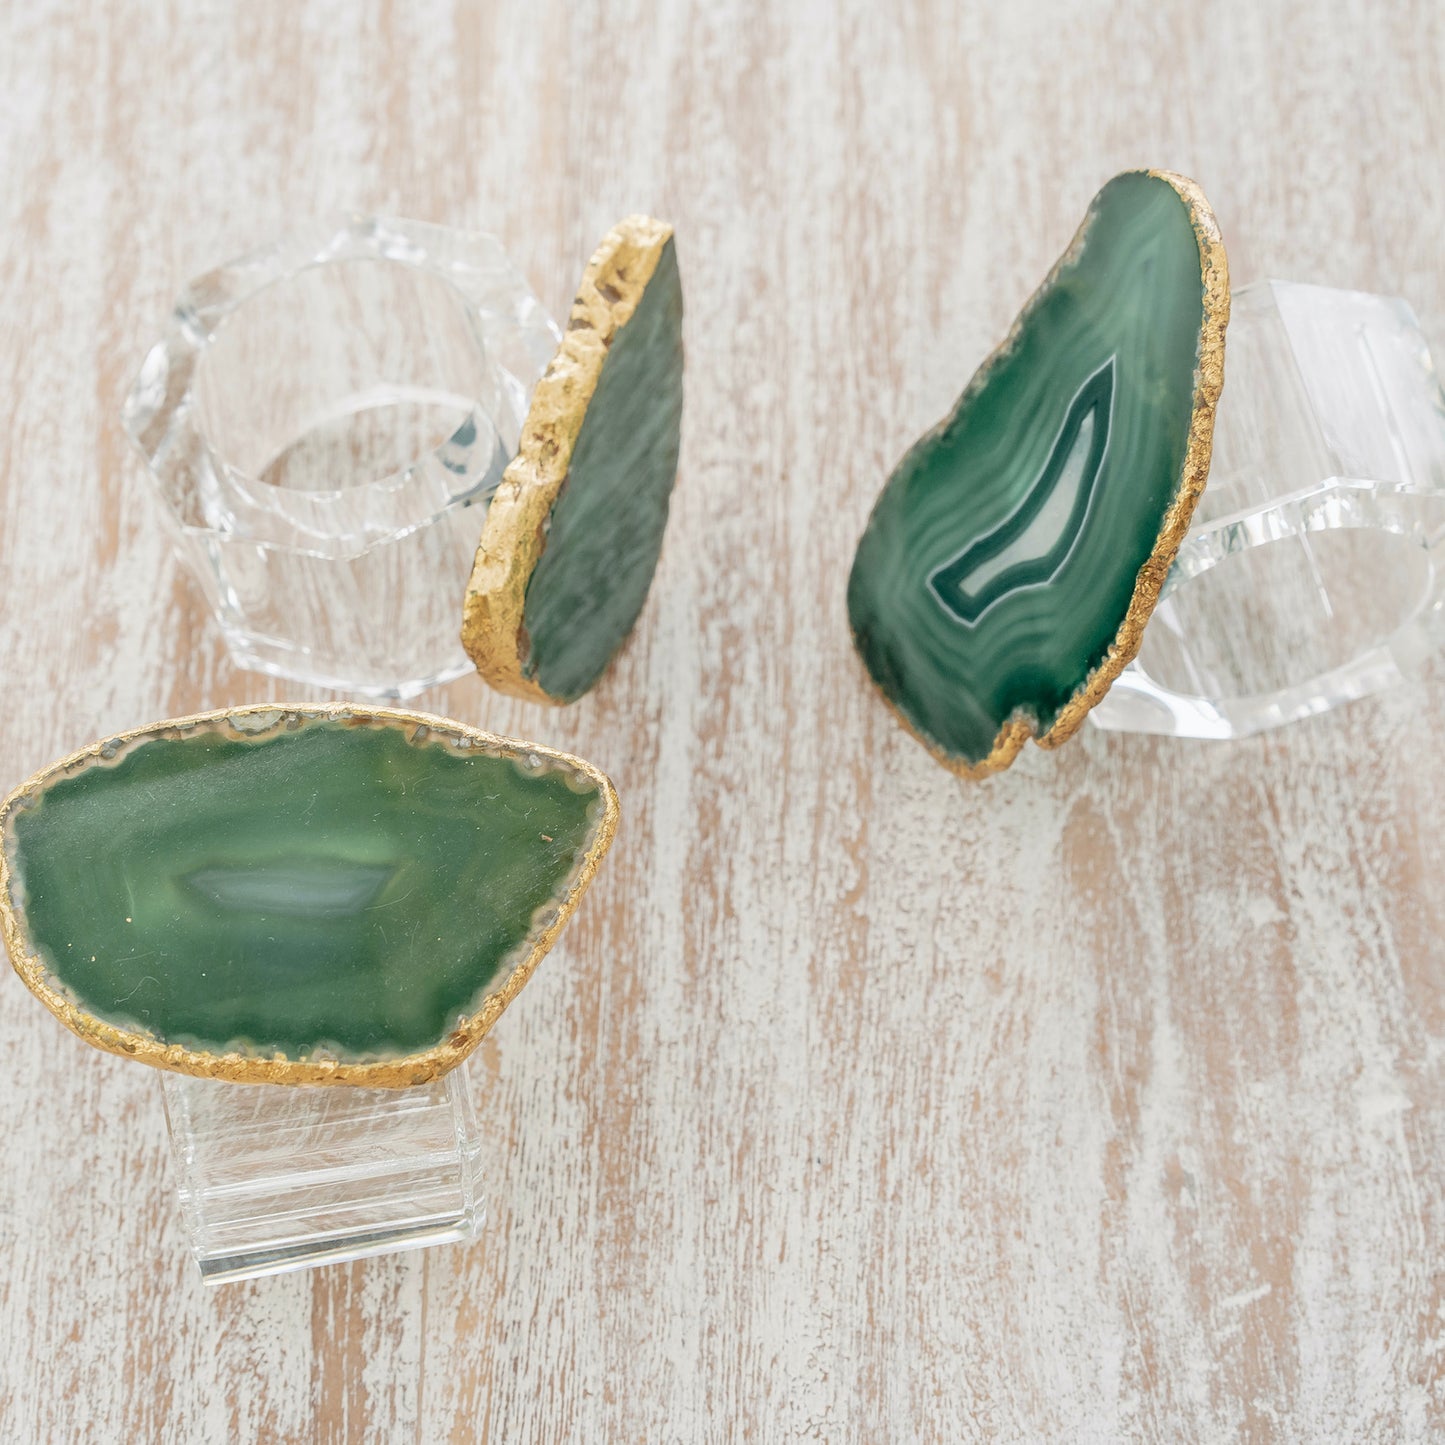 Green Agate on Acrylic Napkin Ring